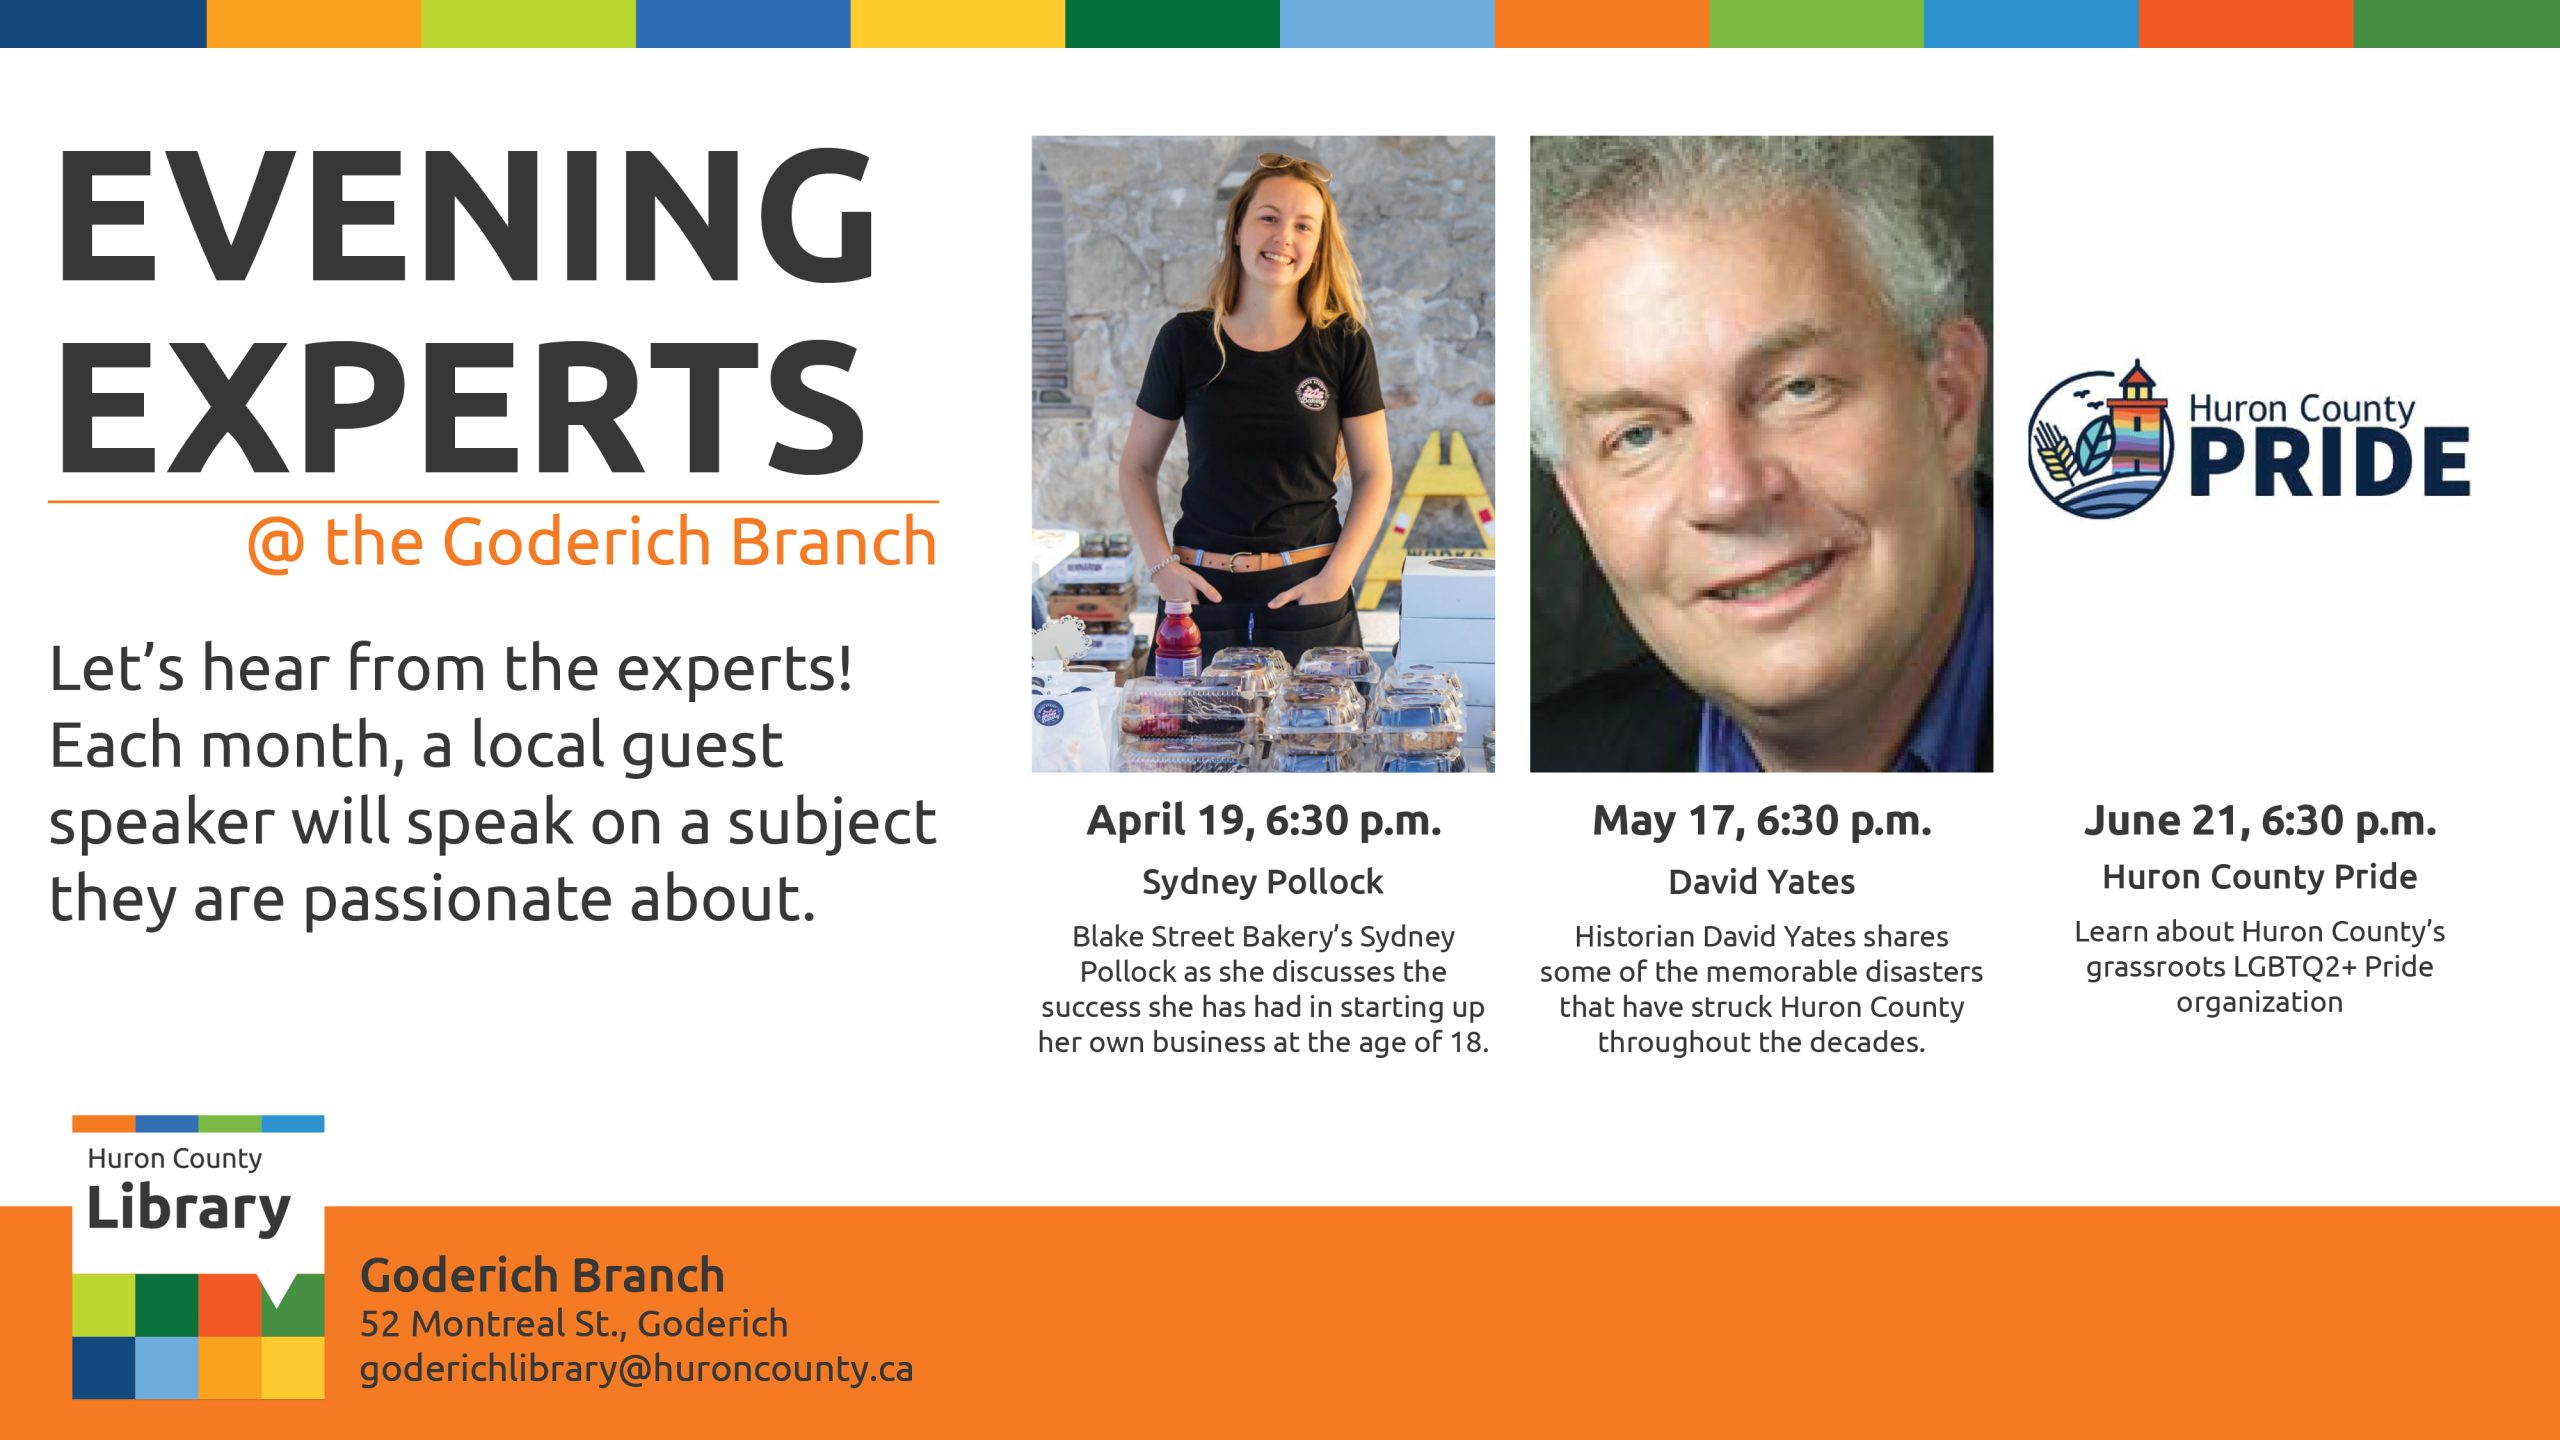 Three images of guest speakers for Goderich Branch's Evening Experts Program